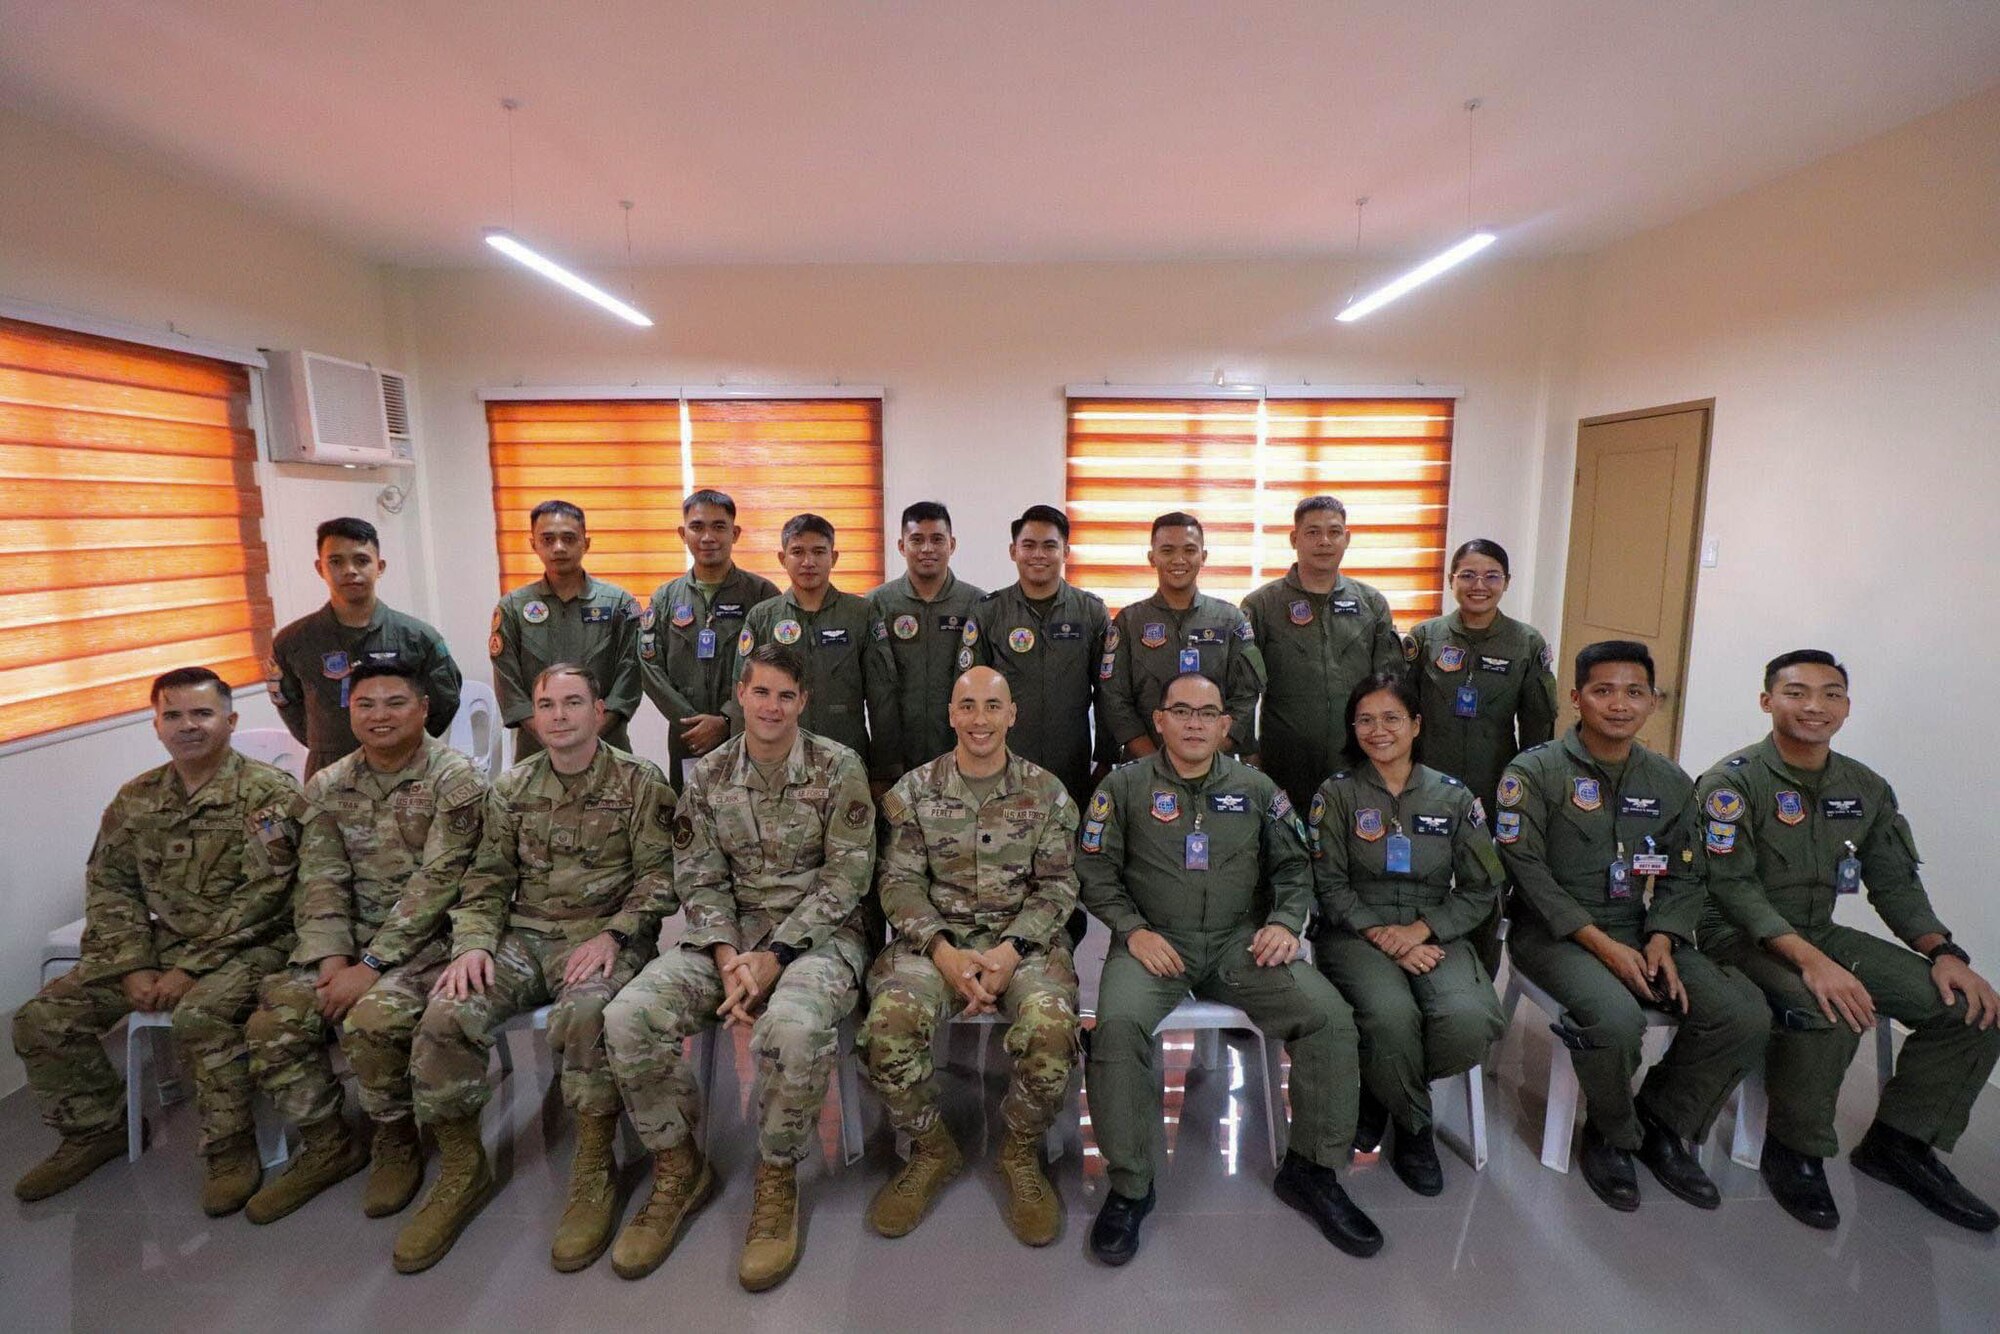 Leaders from the 374th Maintenance Group sit for a group photo alongside members of the Philippine Air Force.